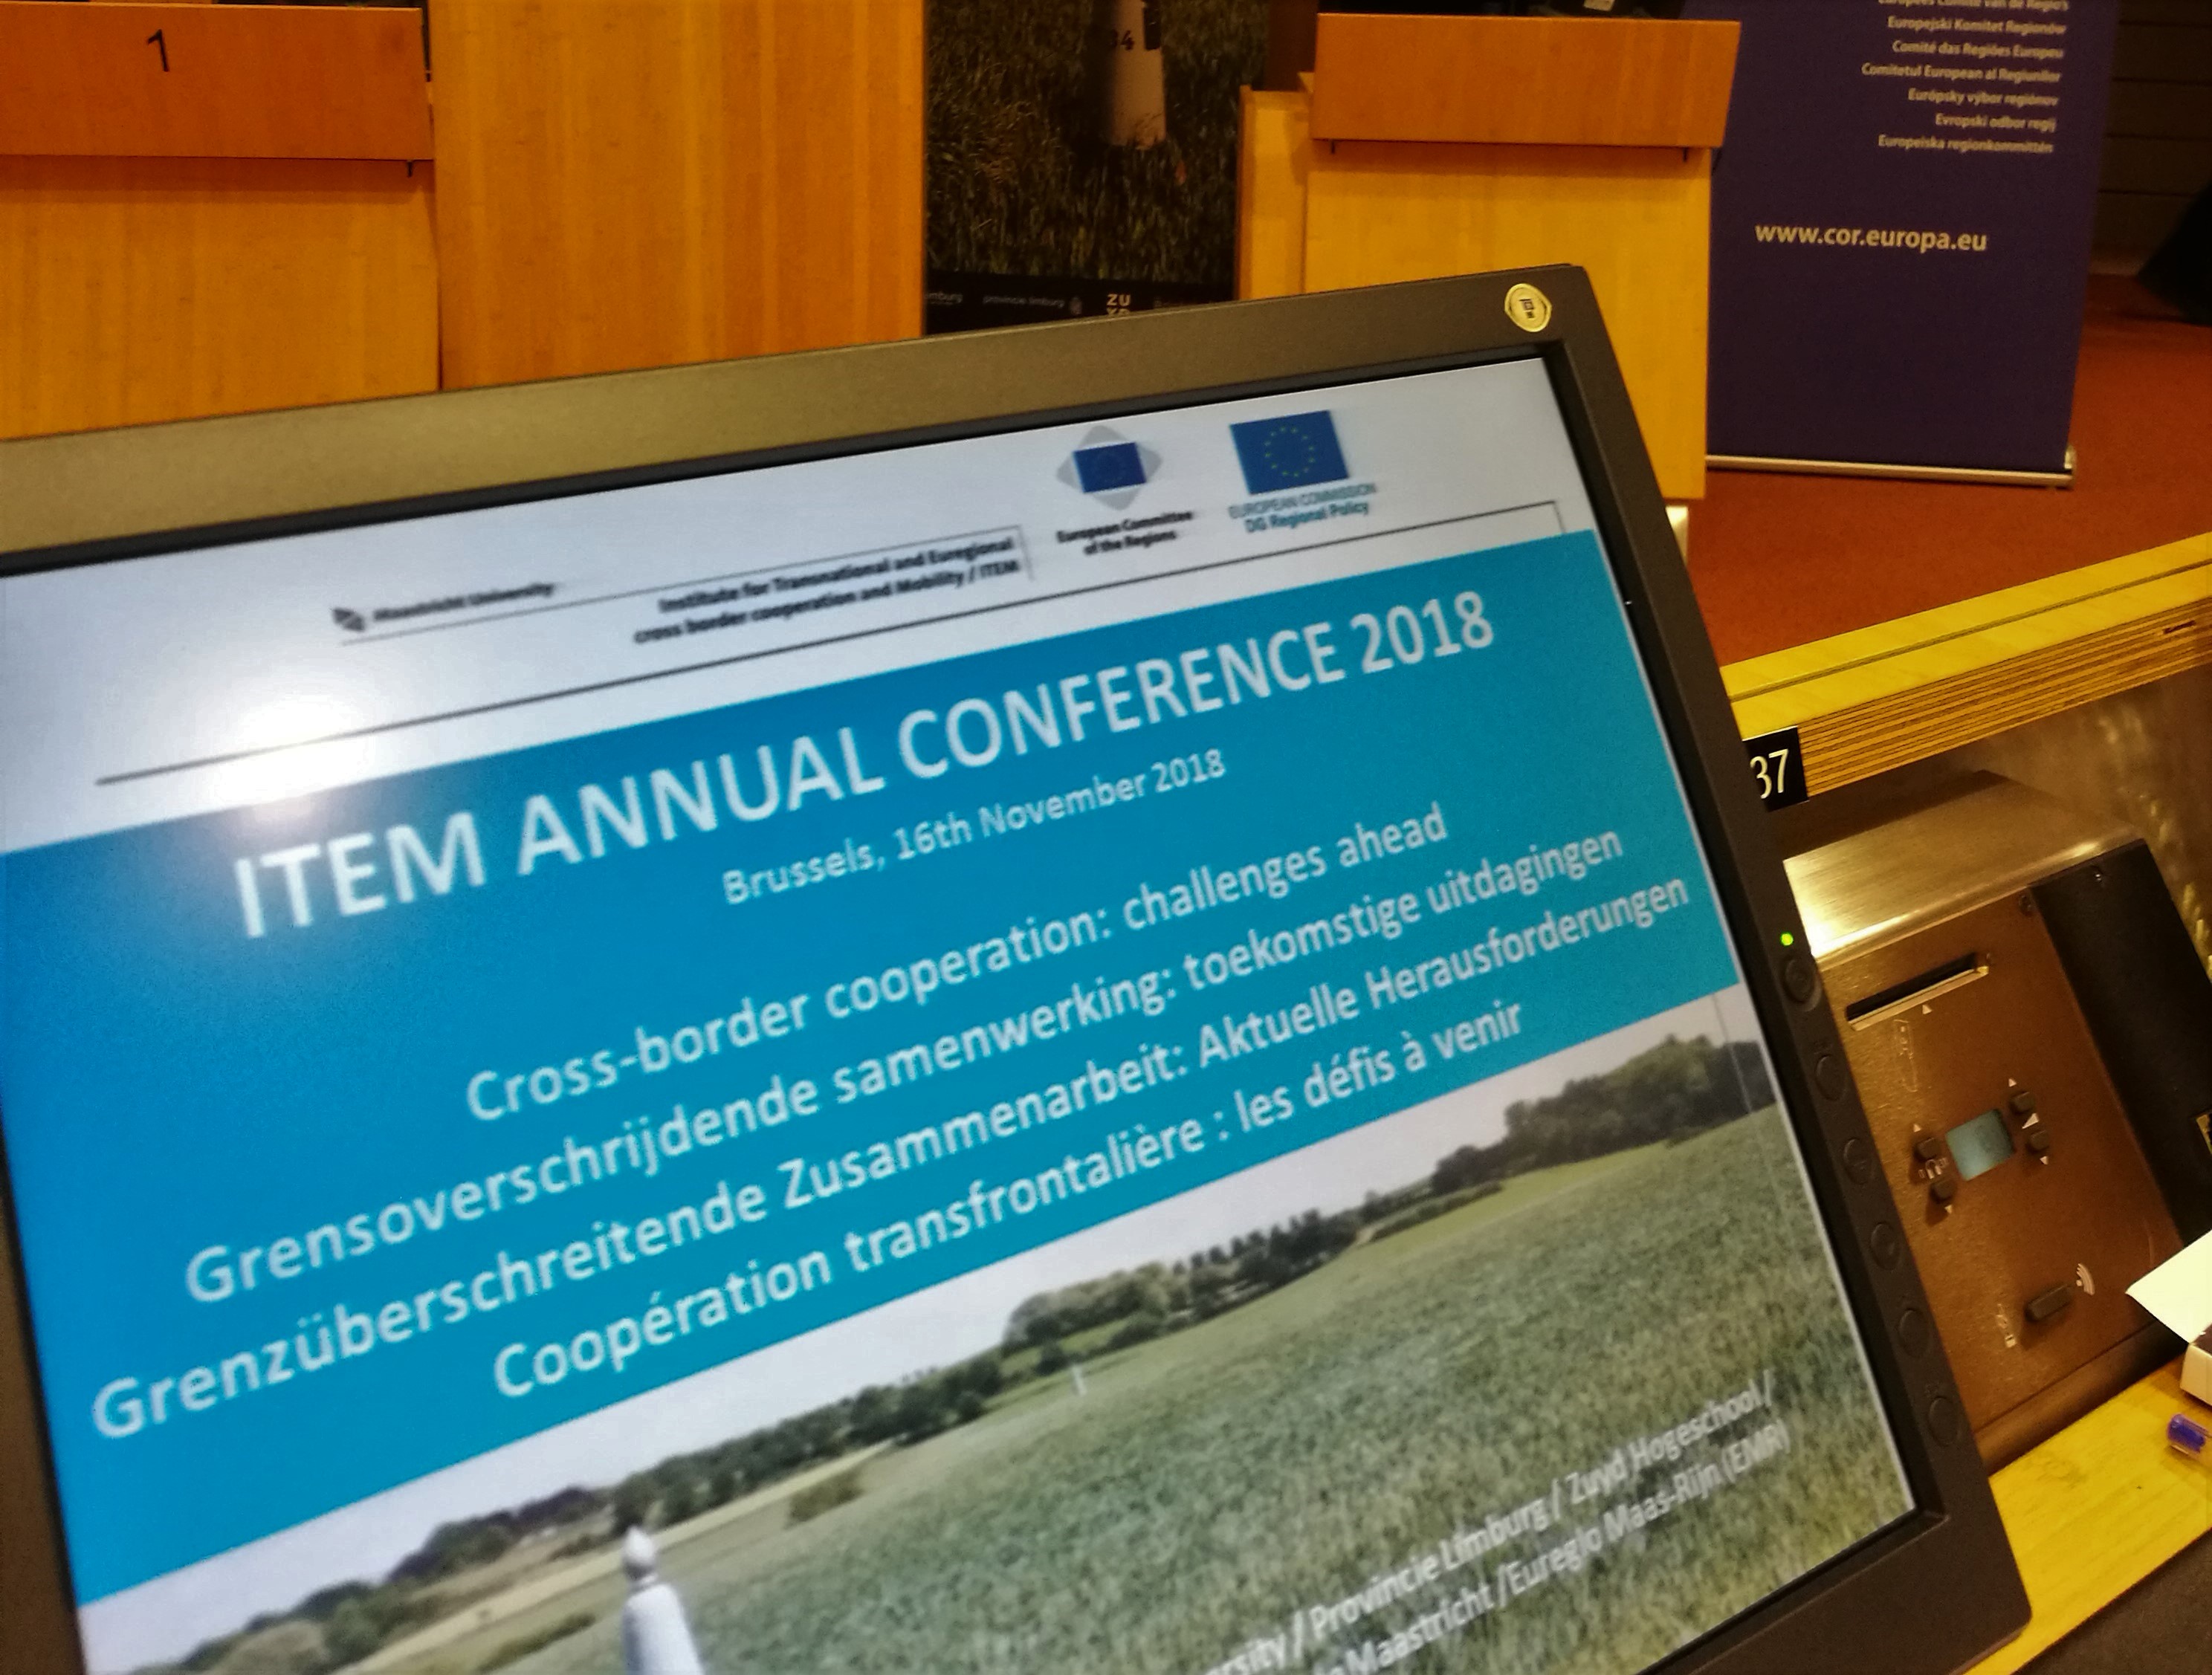 ITEM annual conference